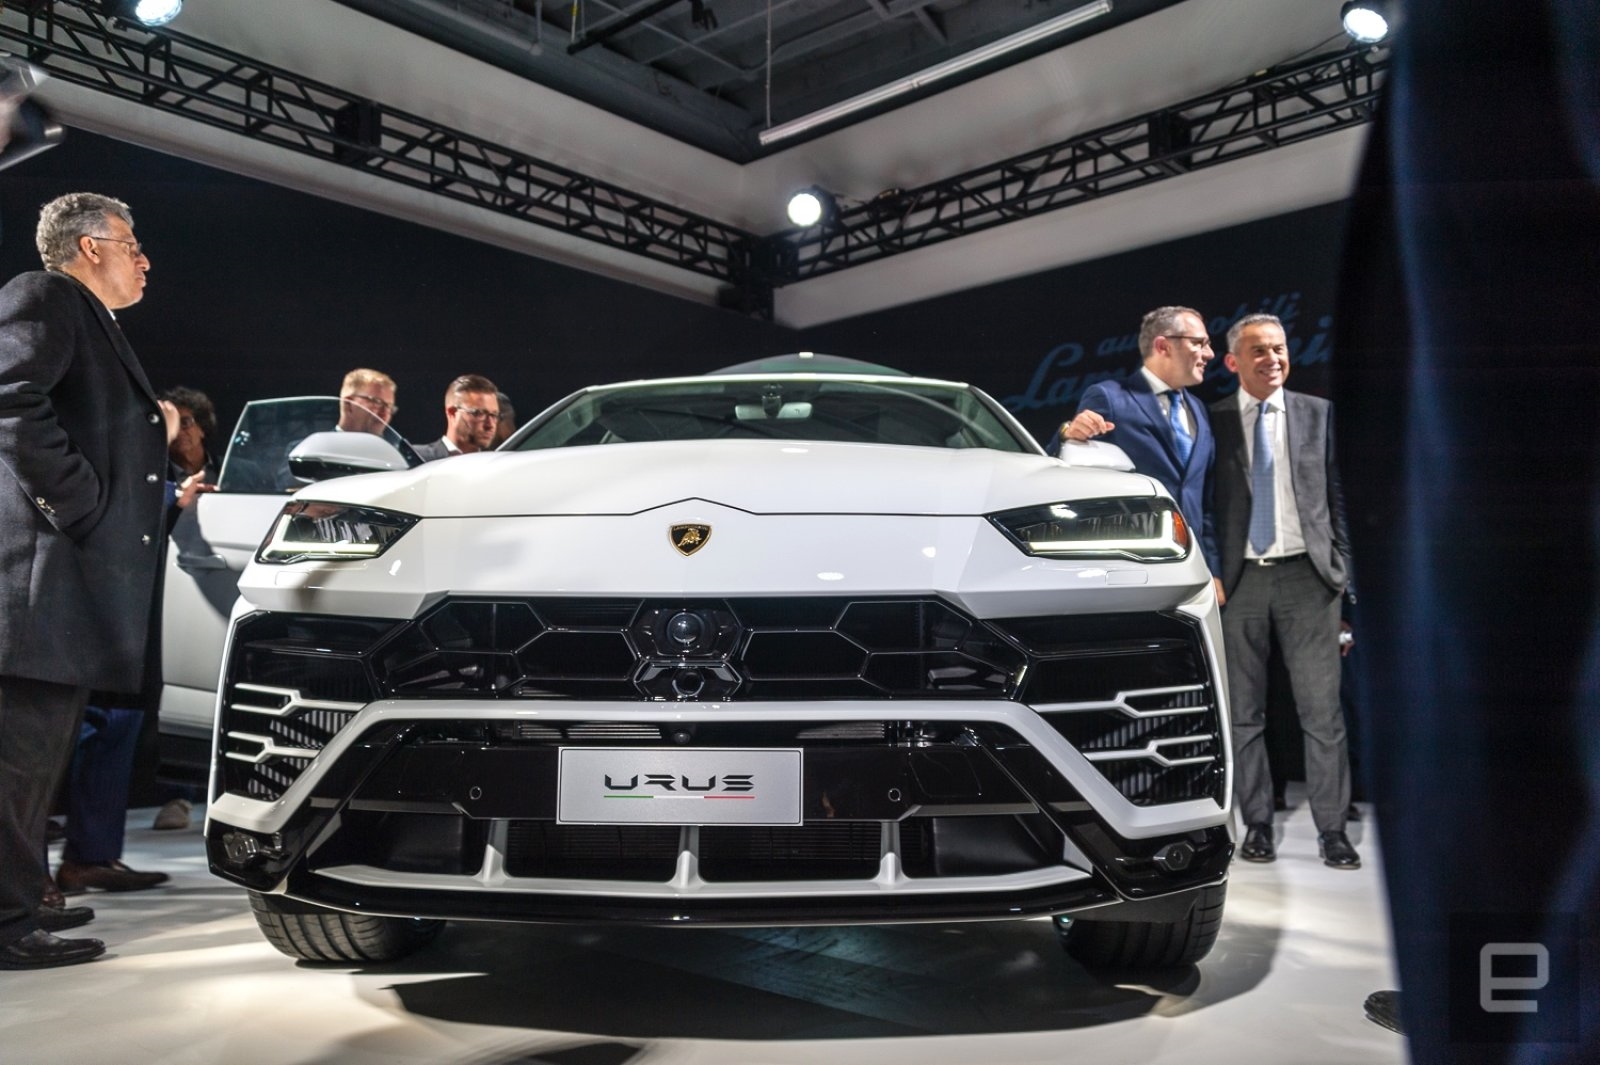 Lamborghini’s 650HP Urus is equal parts muscle and infotainment | DeviceDaily.com